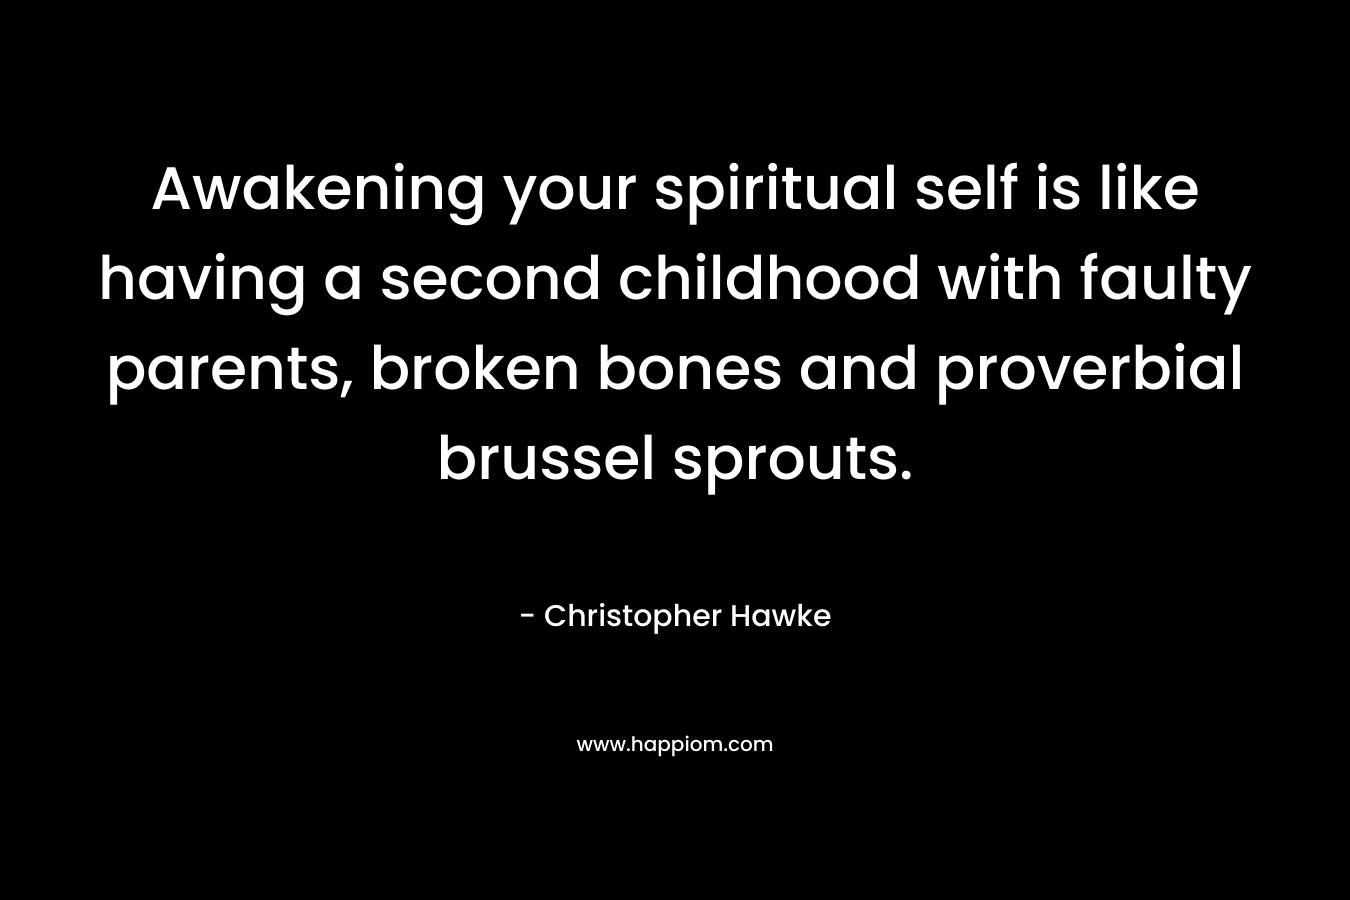 Awakening your spiritual self is like having a second childhood with faulty parents, broken bones and proverbial brussel sprouts.